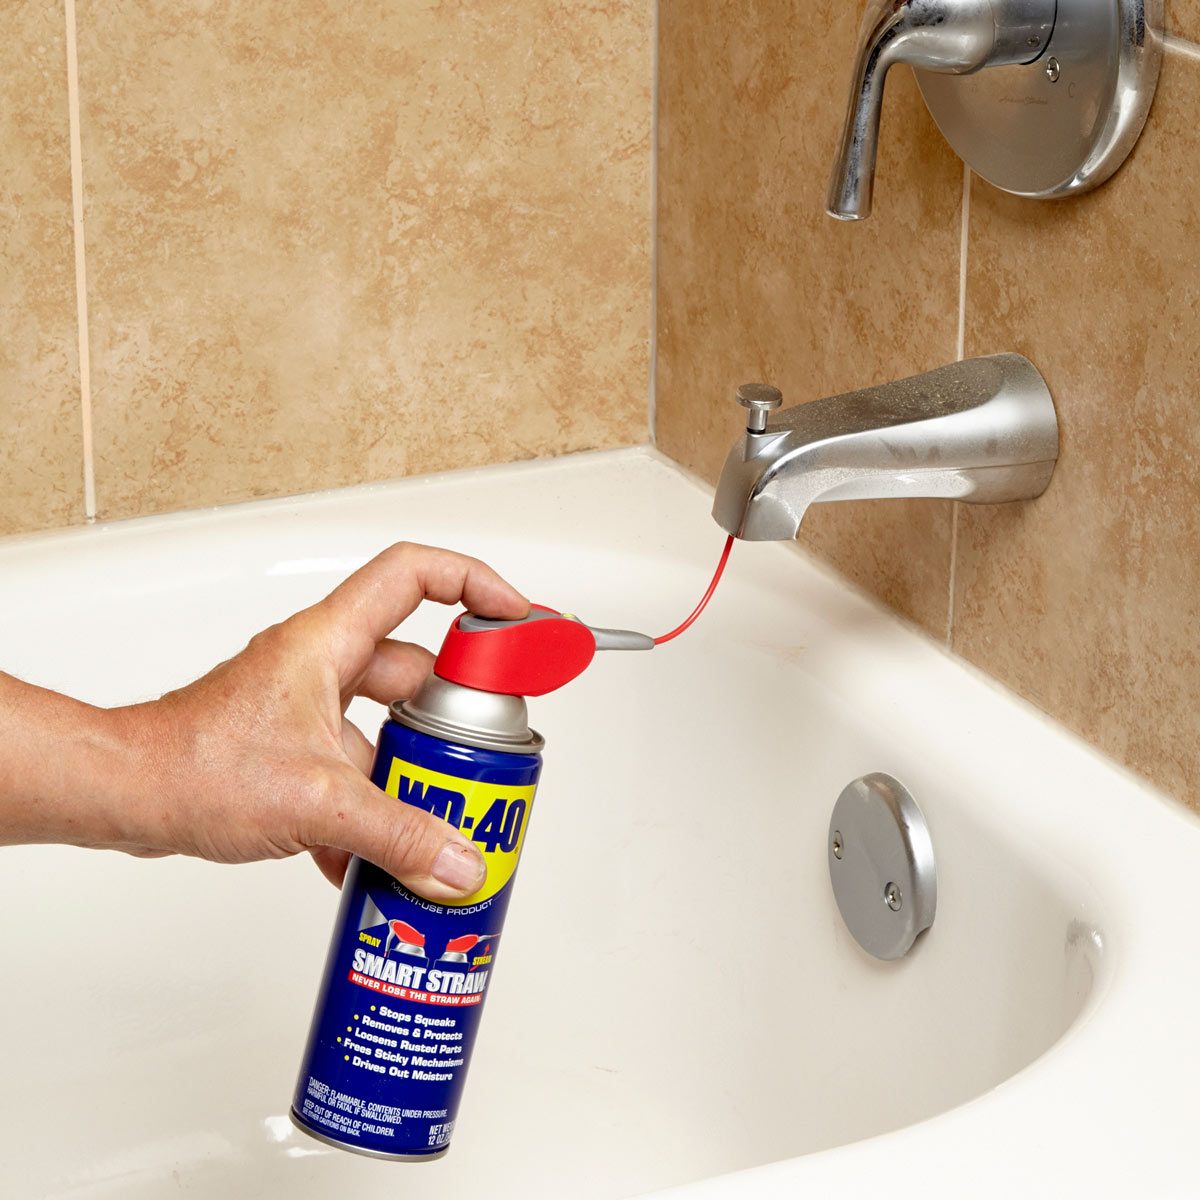 How to Fix a Sticking Tub Spout Diverter